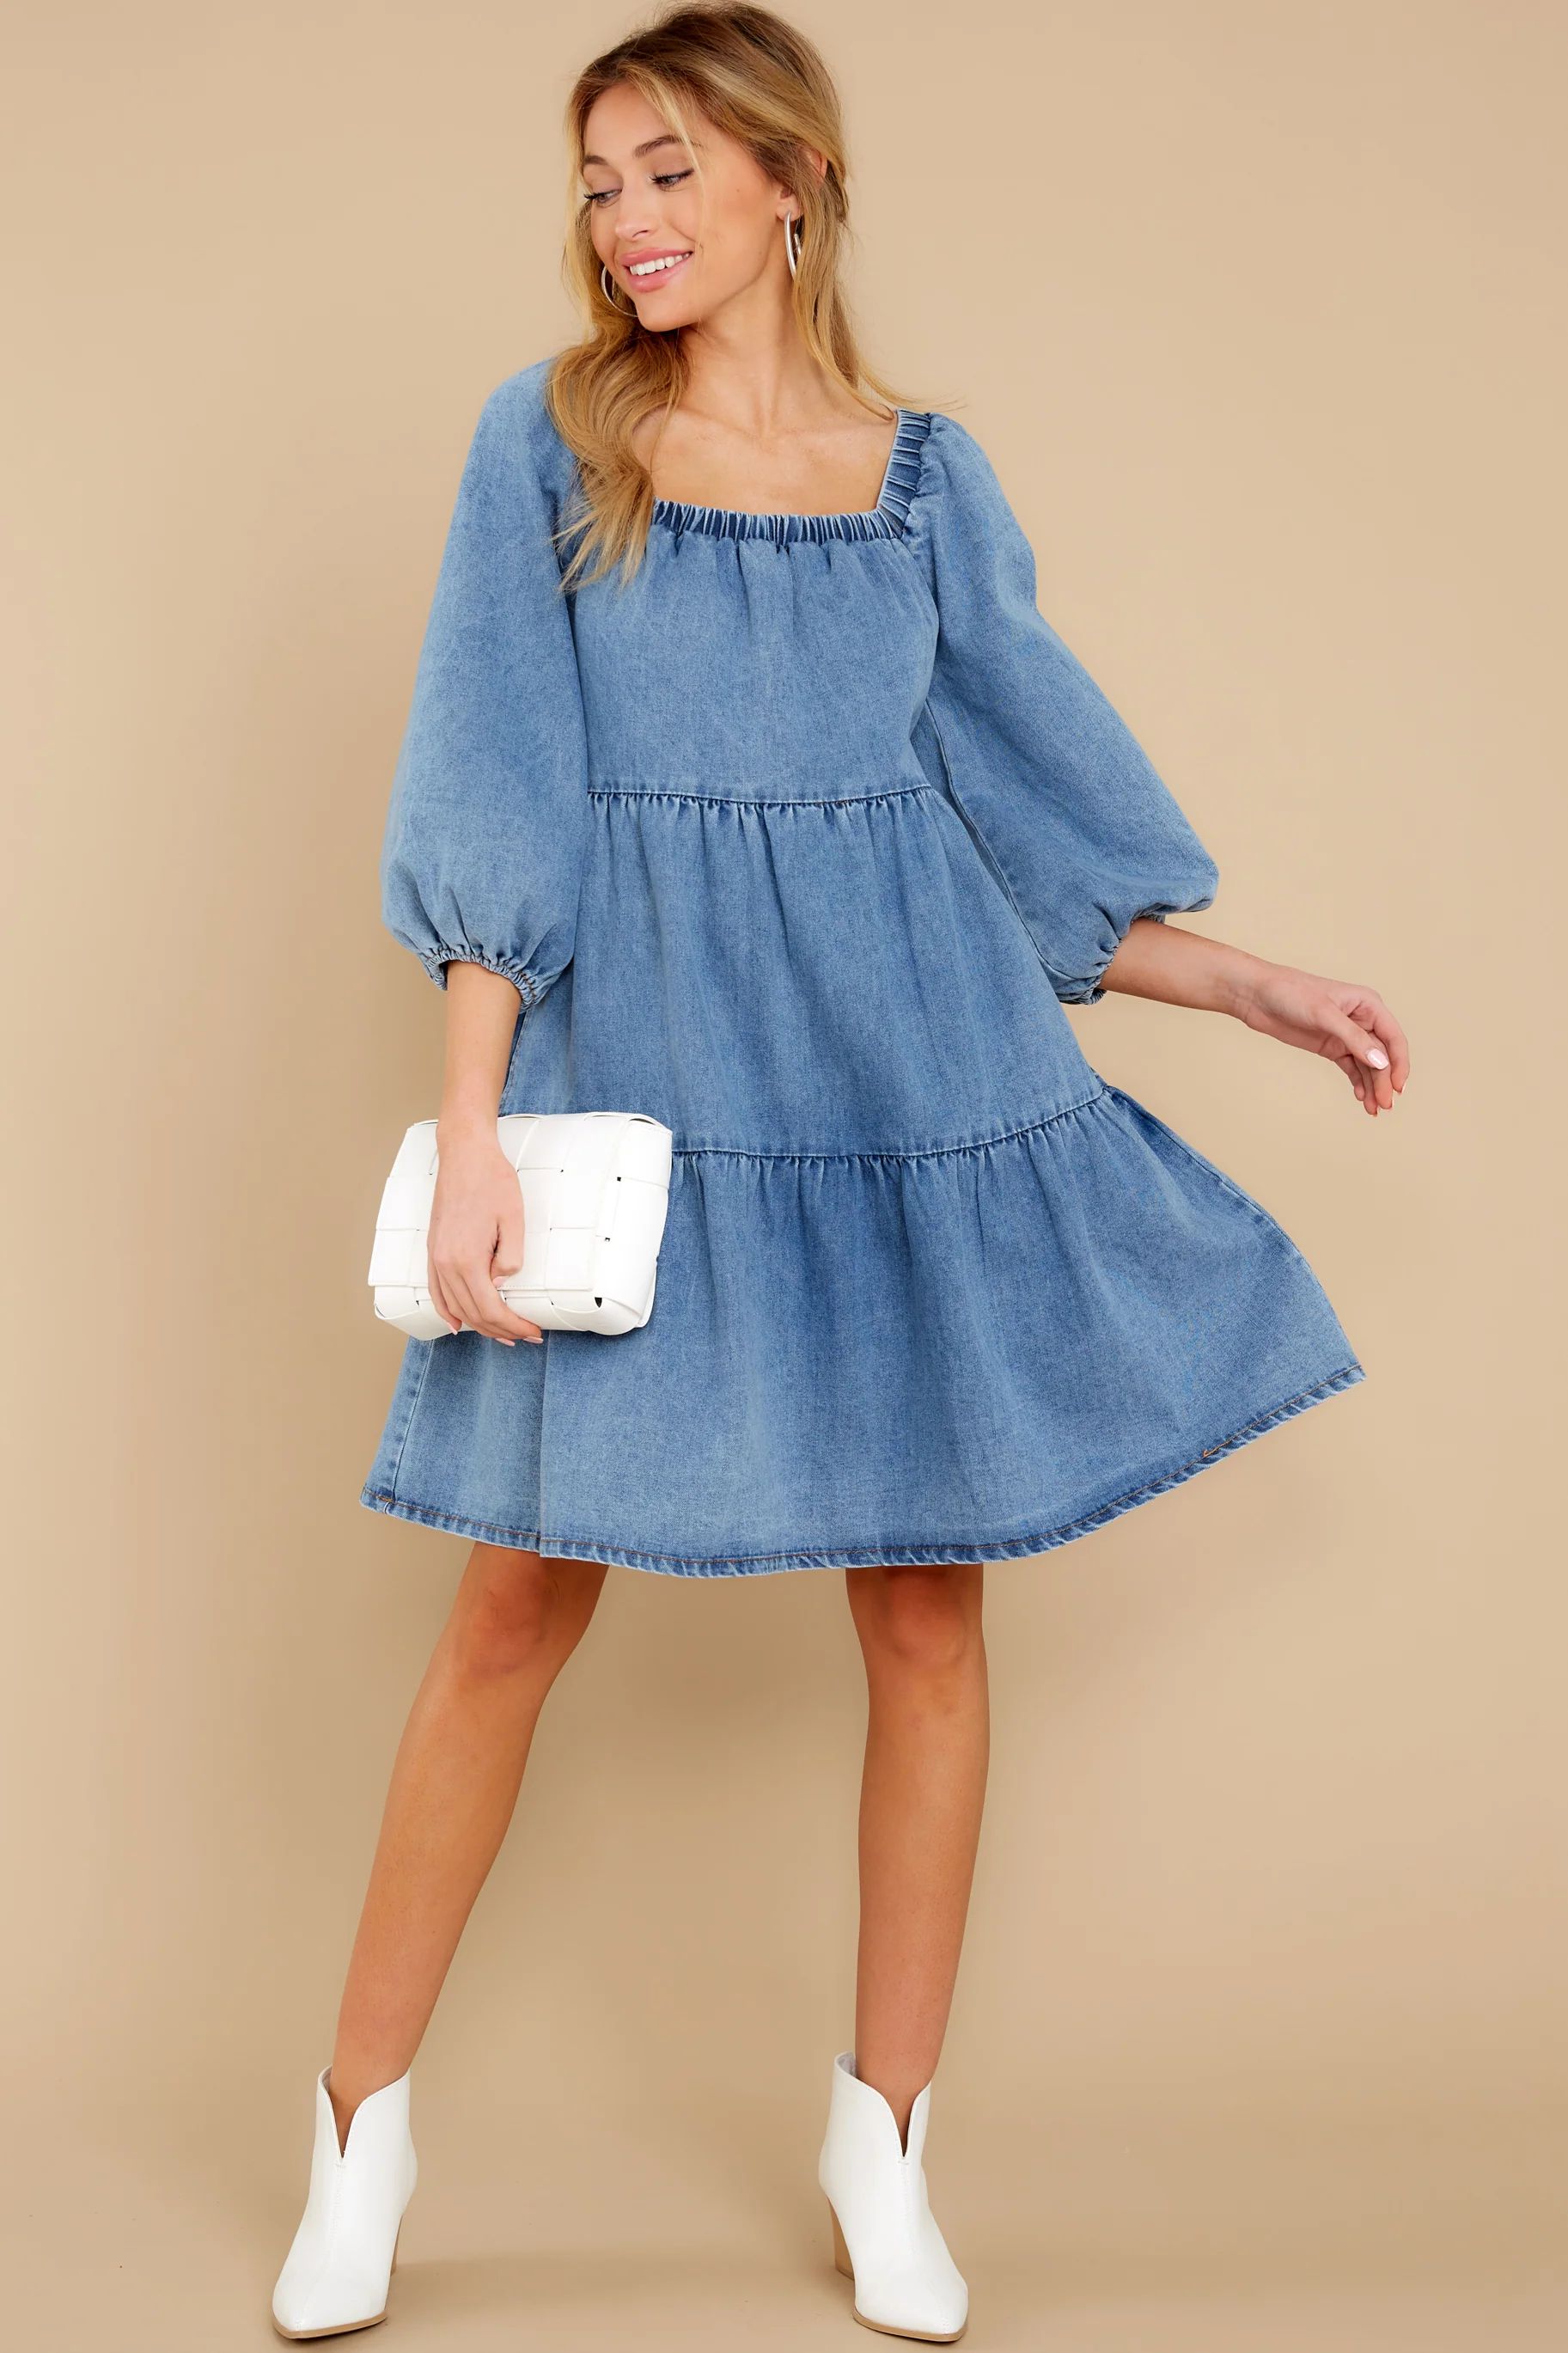 Obvious Attraction Denim Dress Blue | Red Dress 